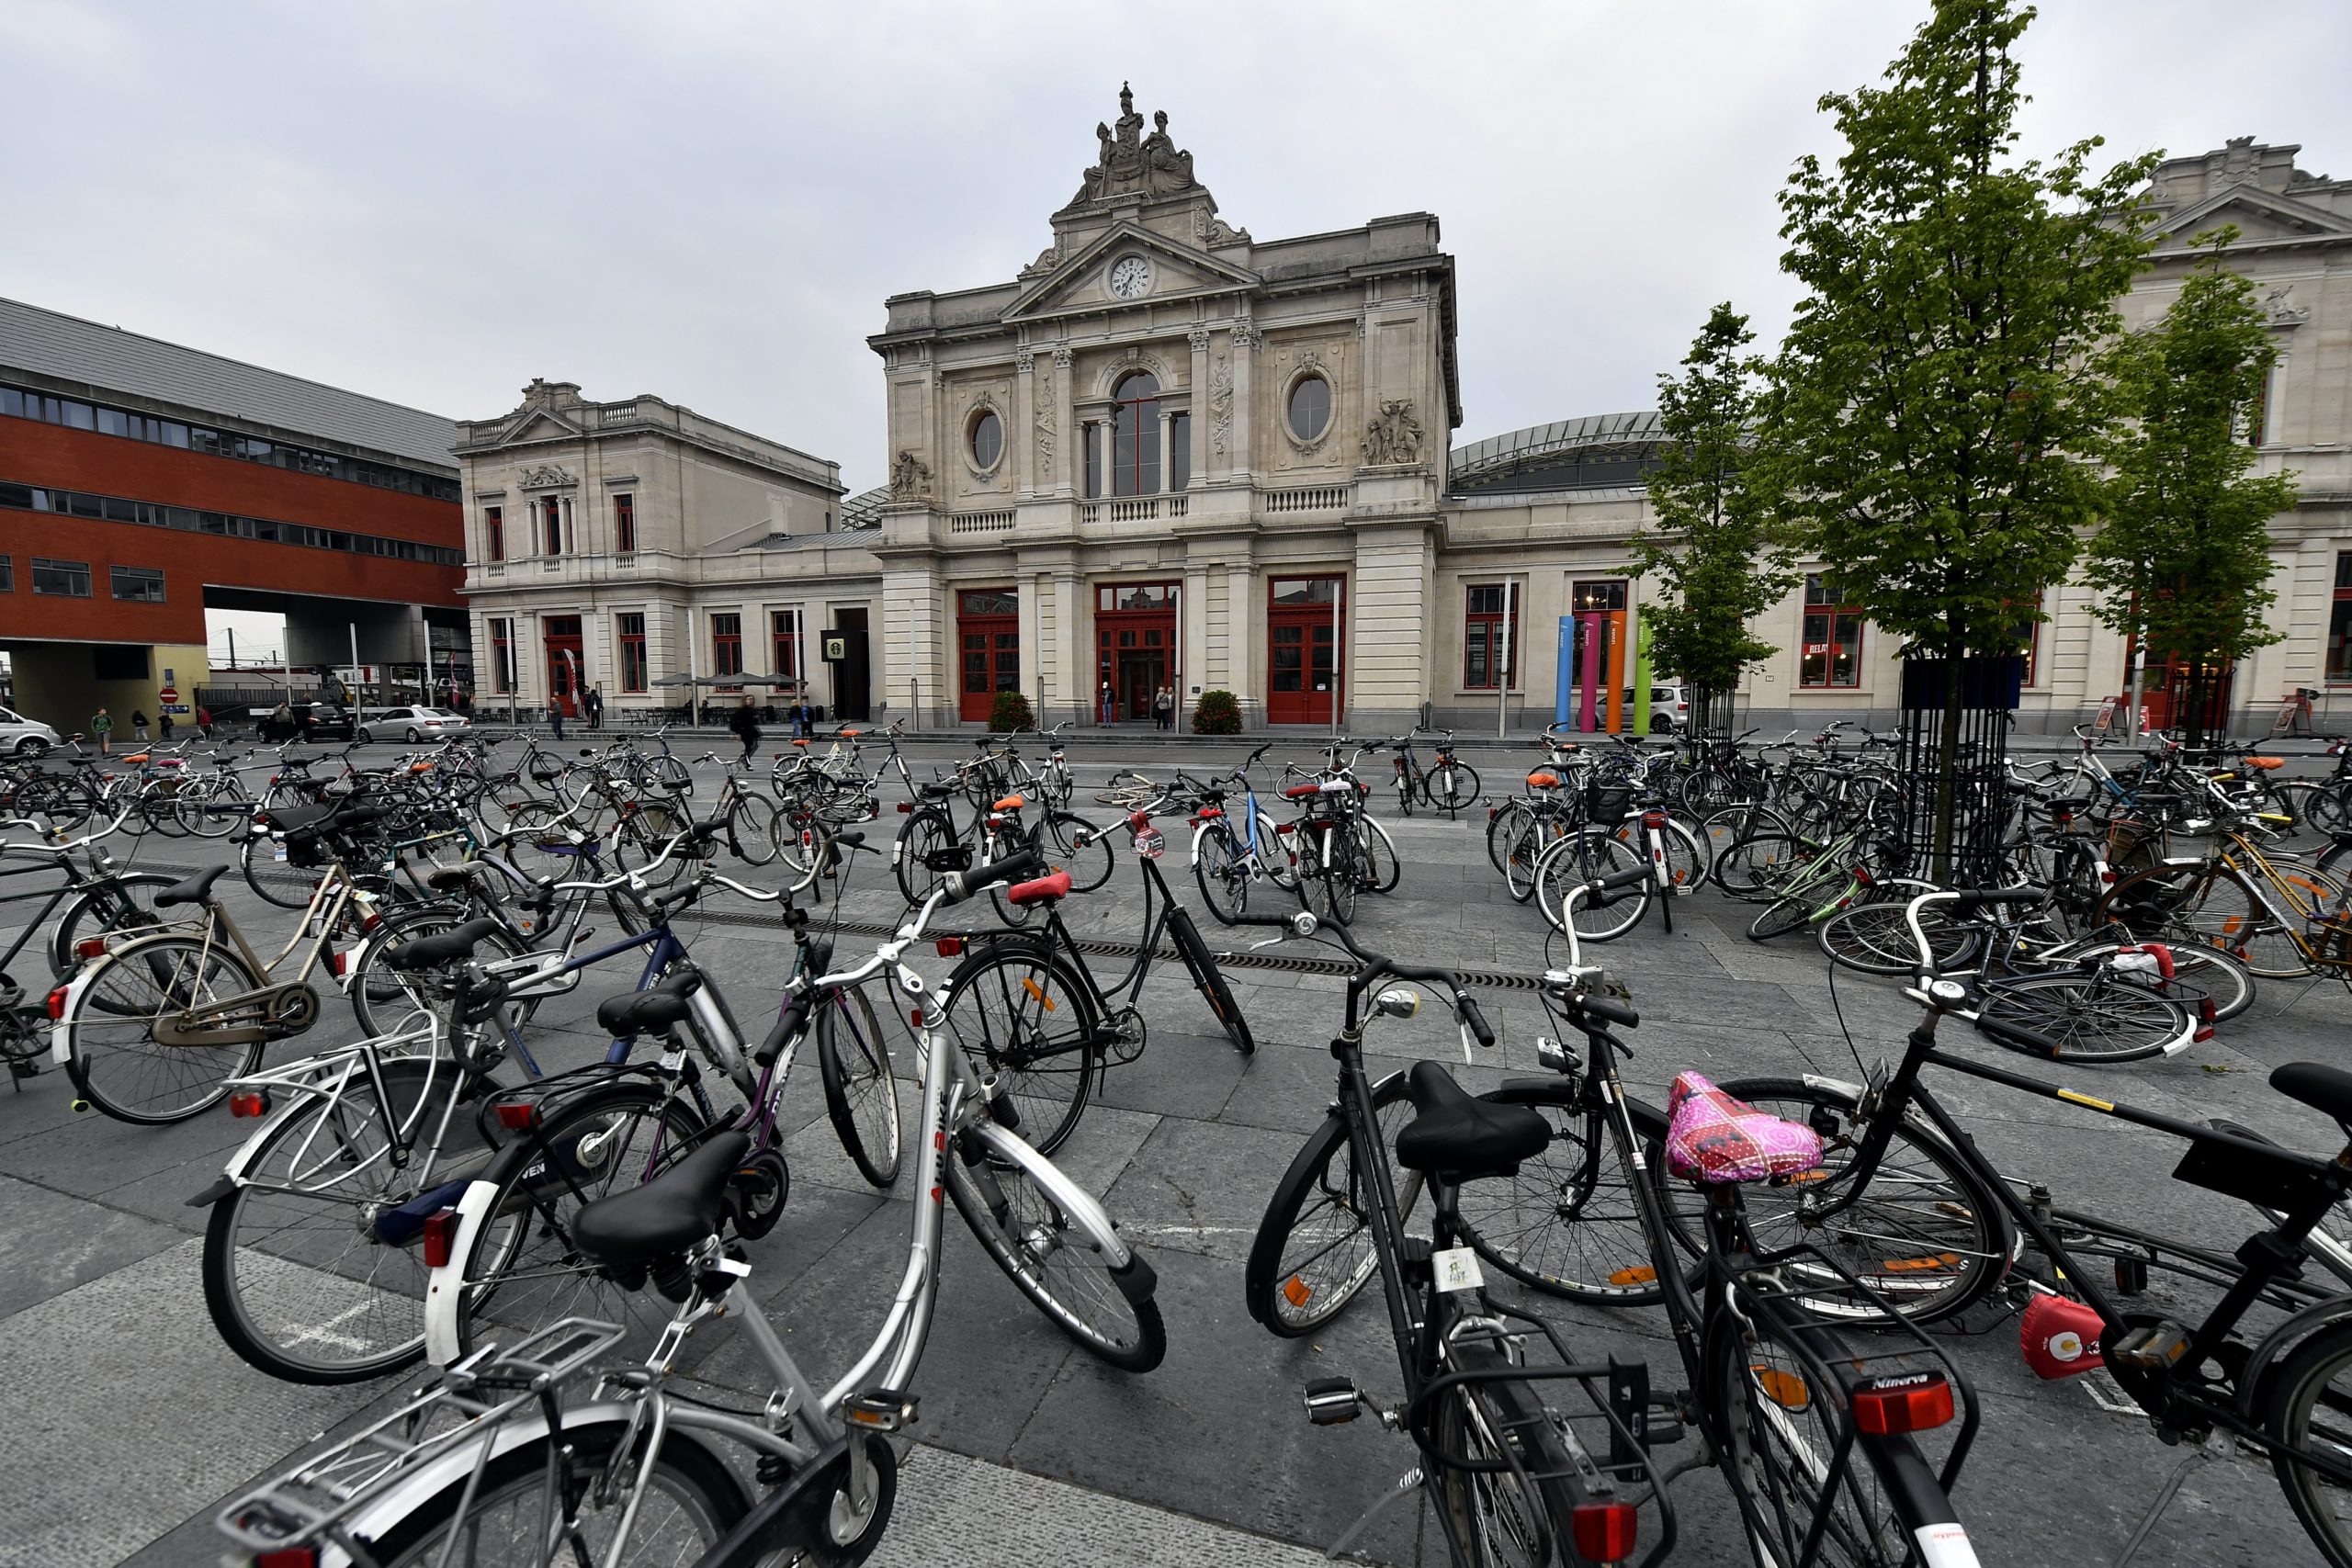 Louvain police use ‘lure bikes’ to catch thieves